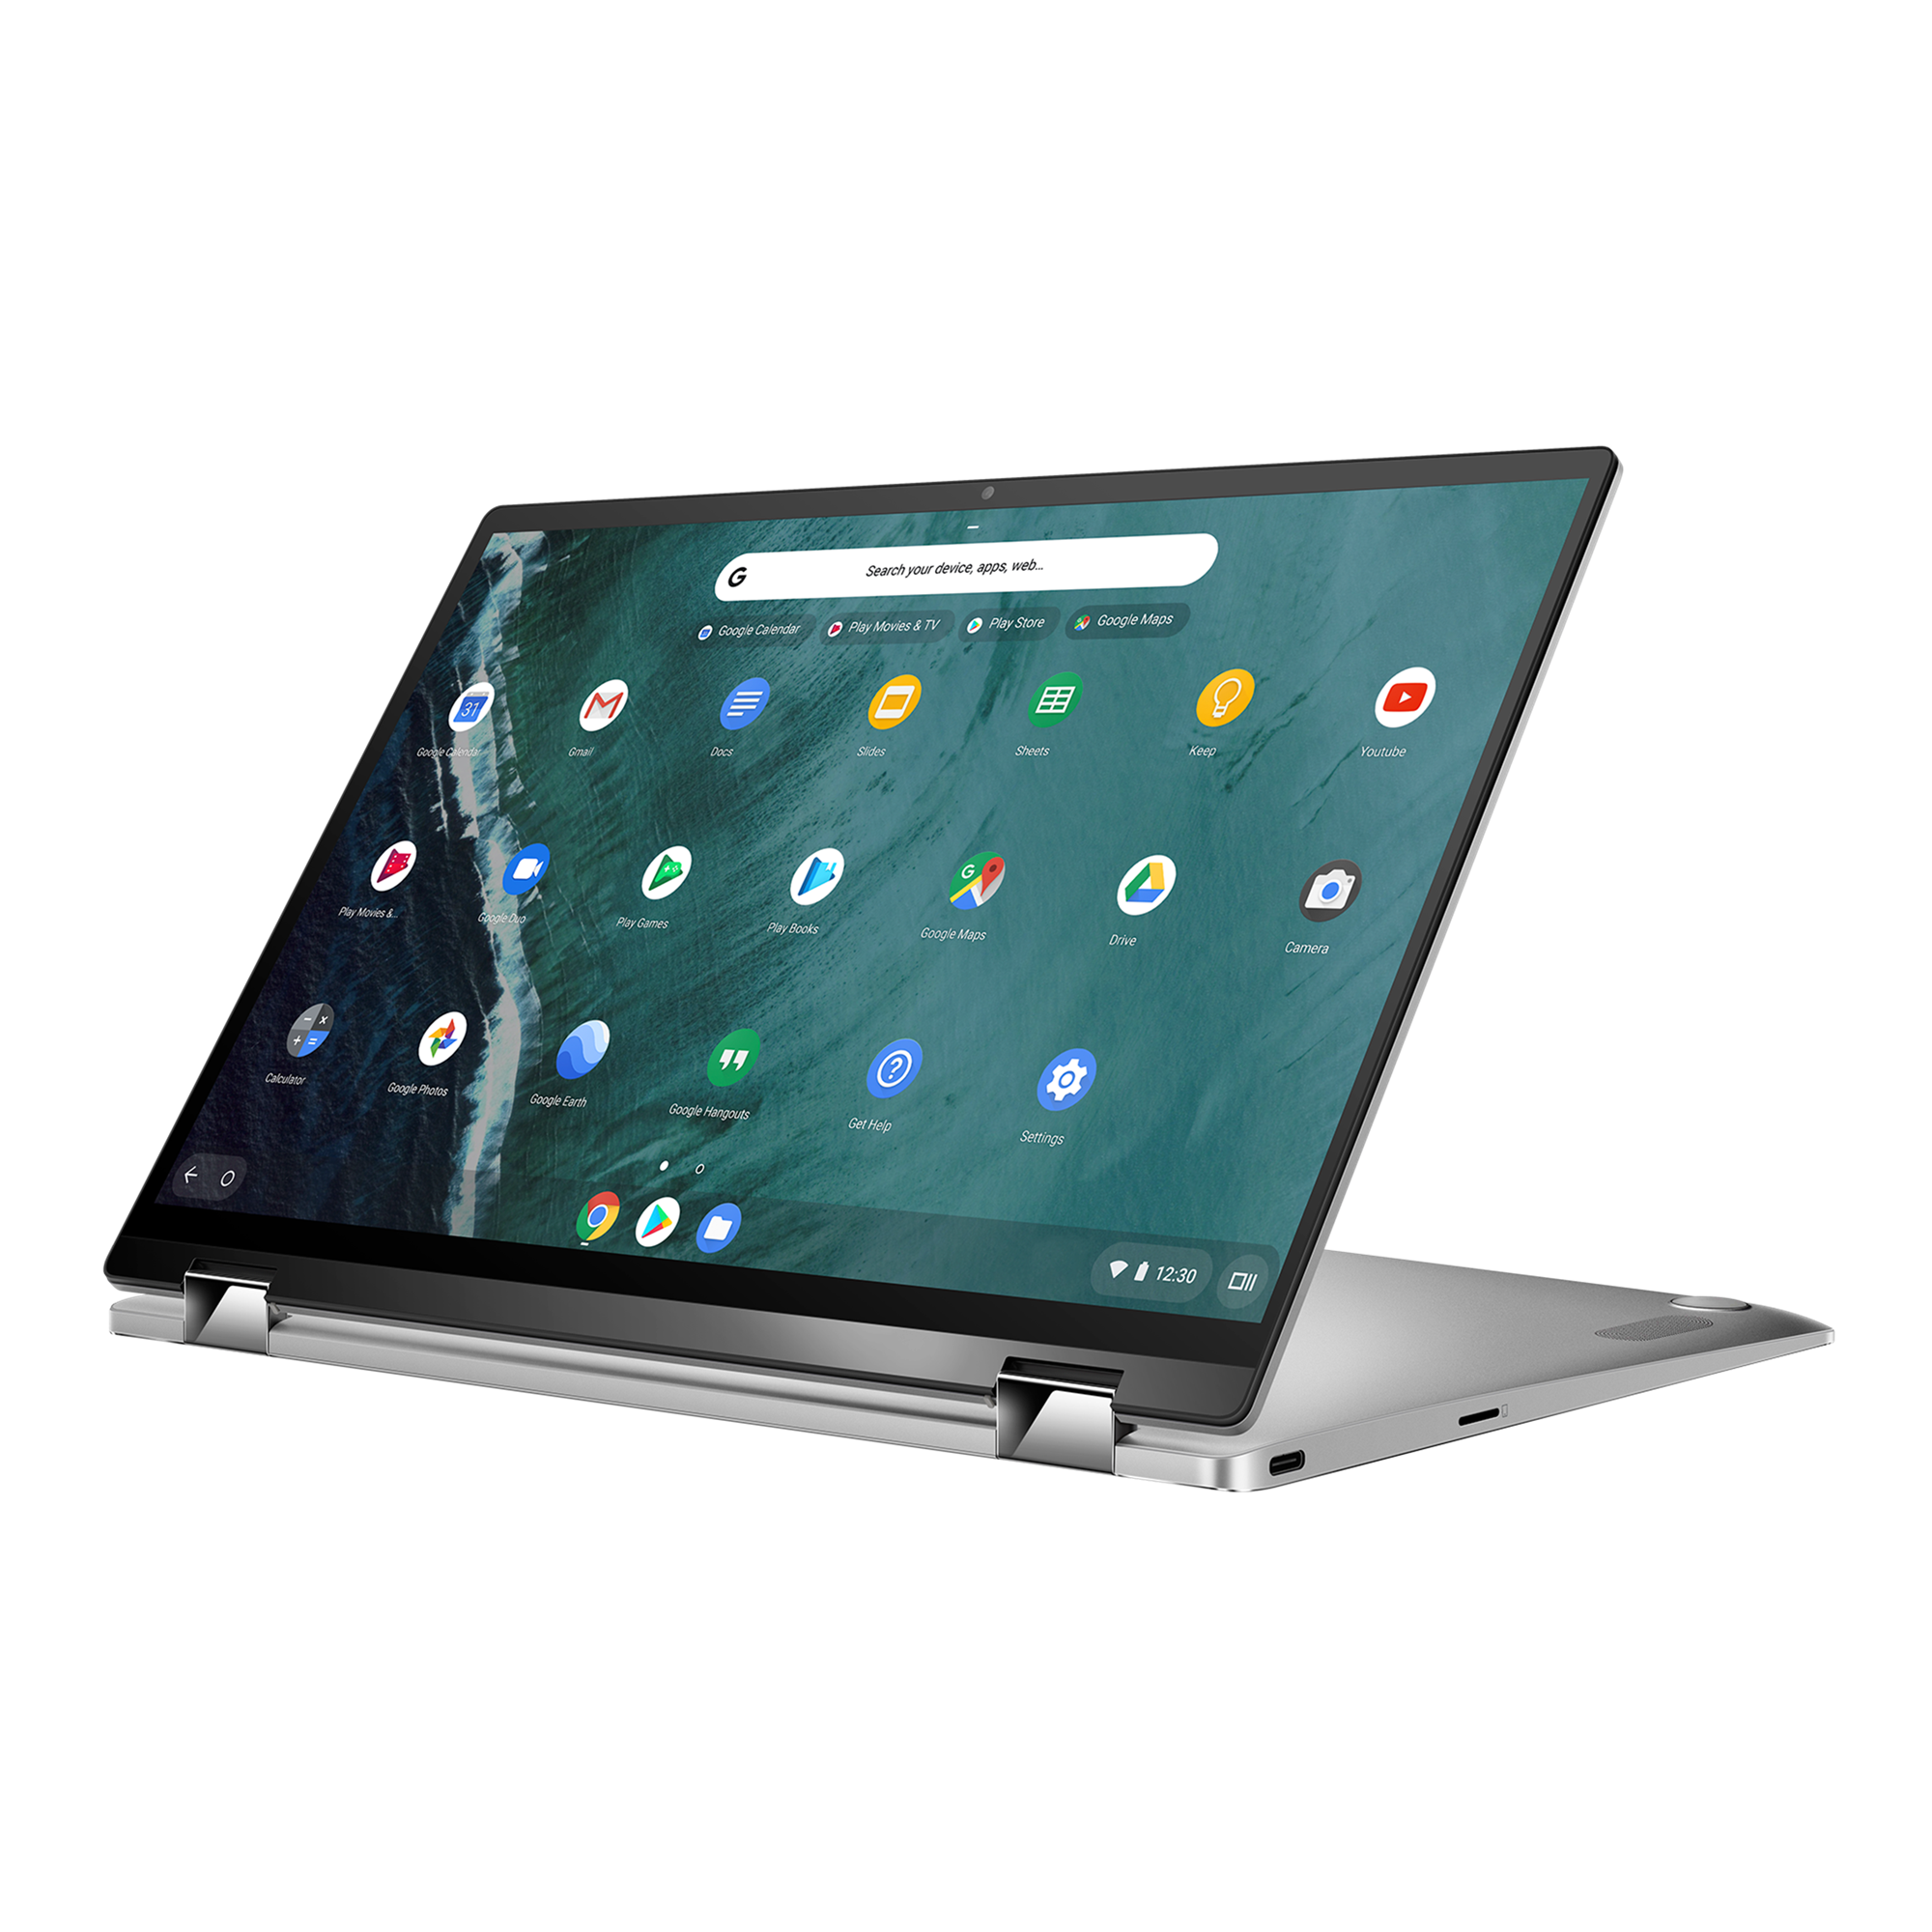 ASUS Chromebook Flip C434｜Laptops For Home｜ASUS USA